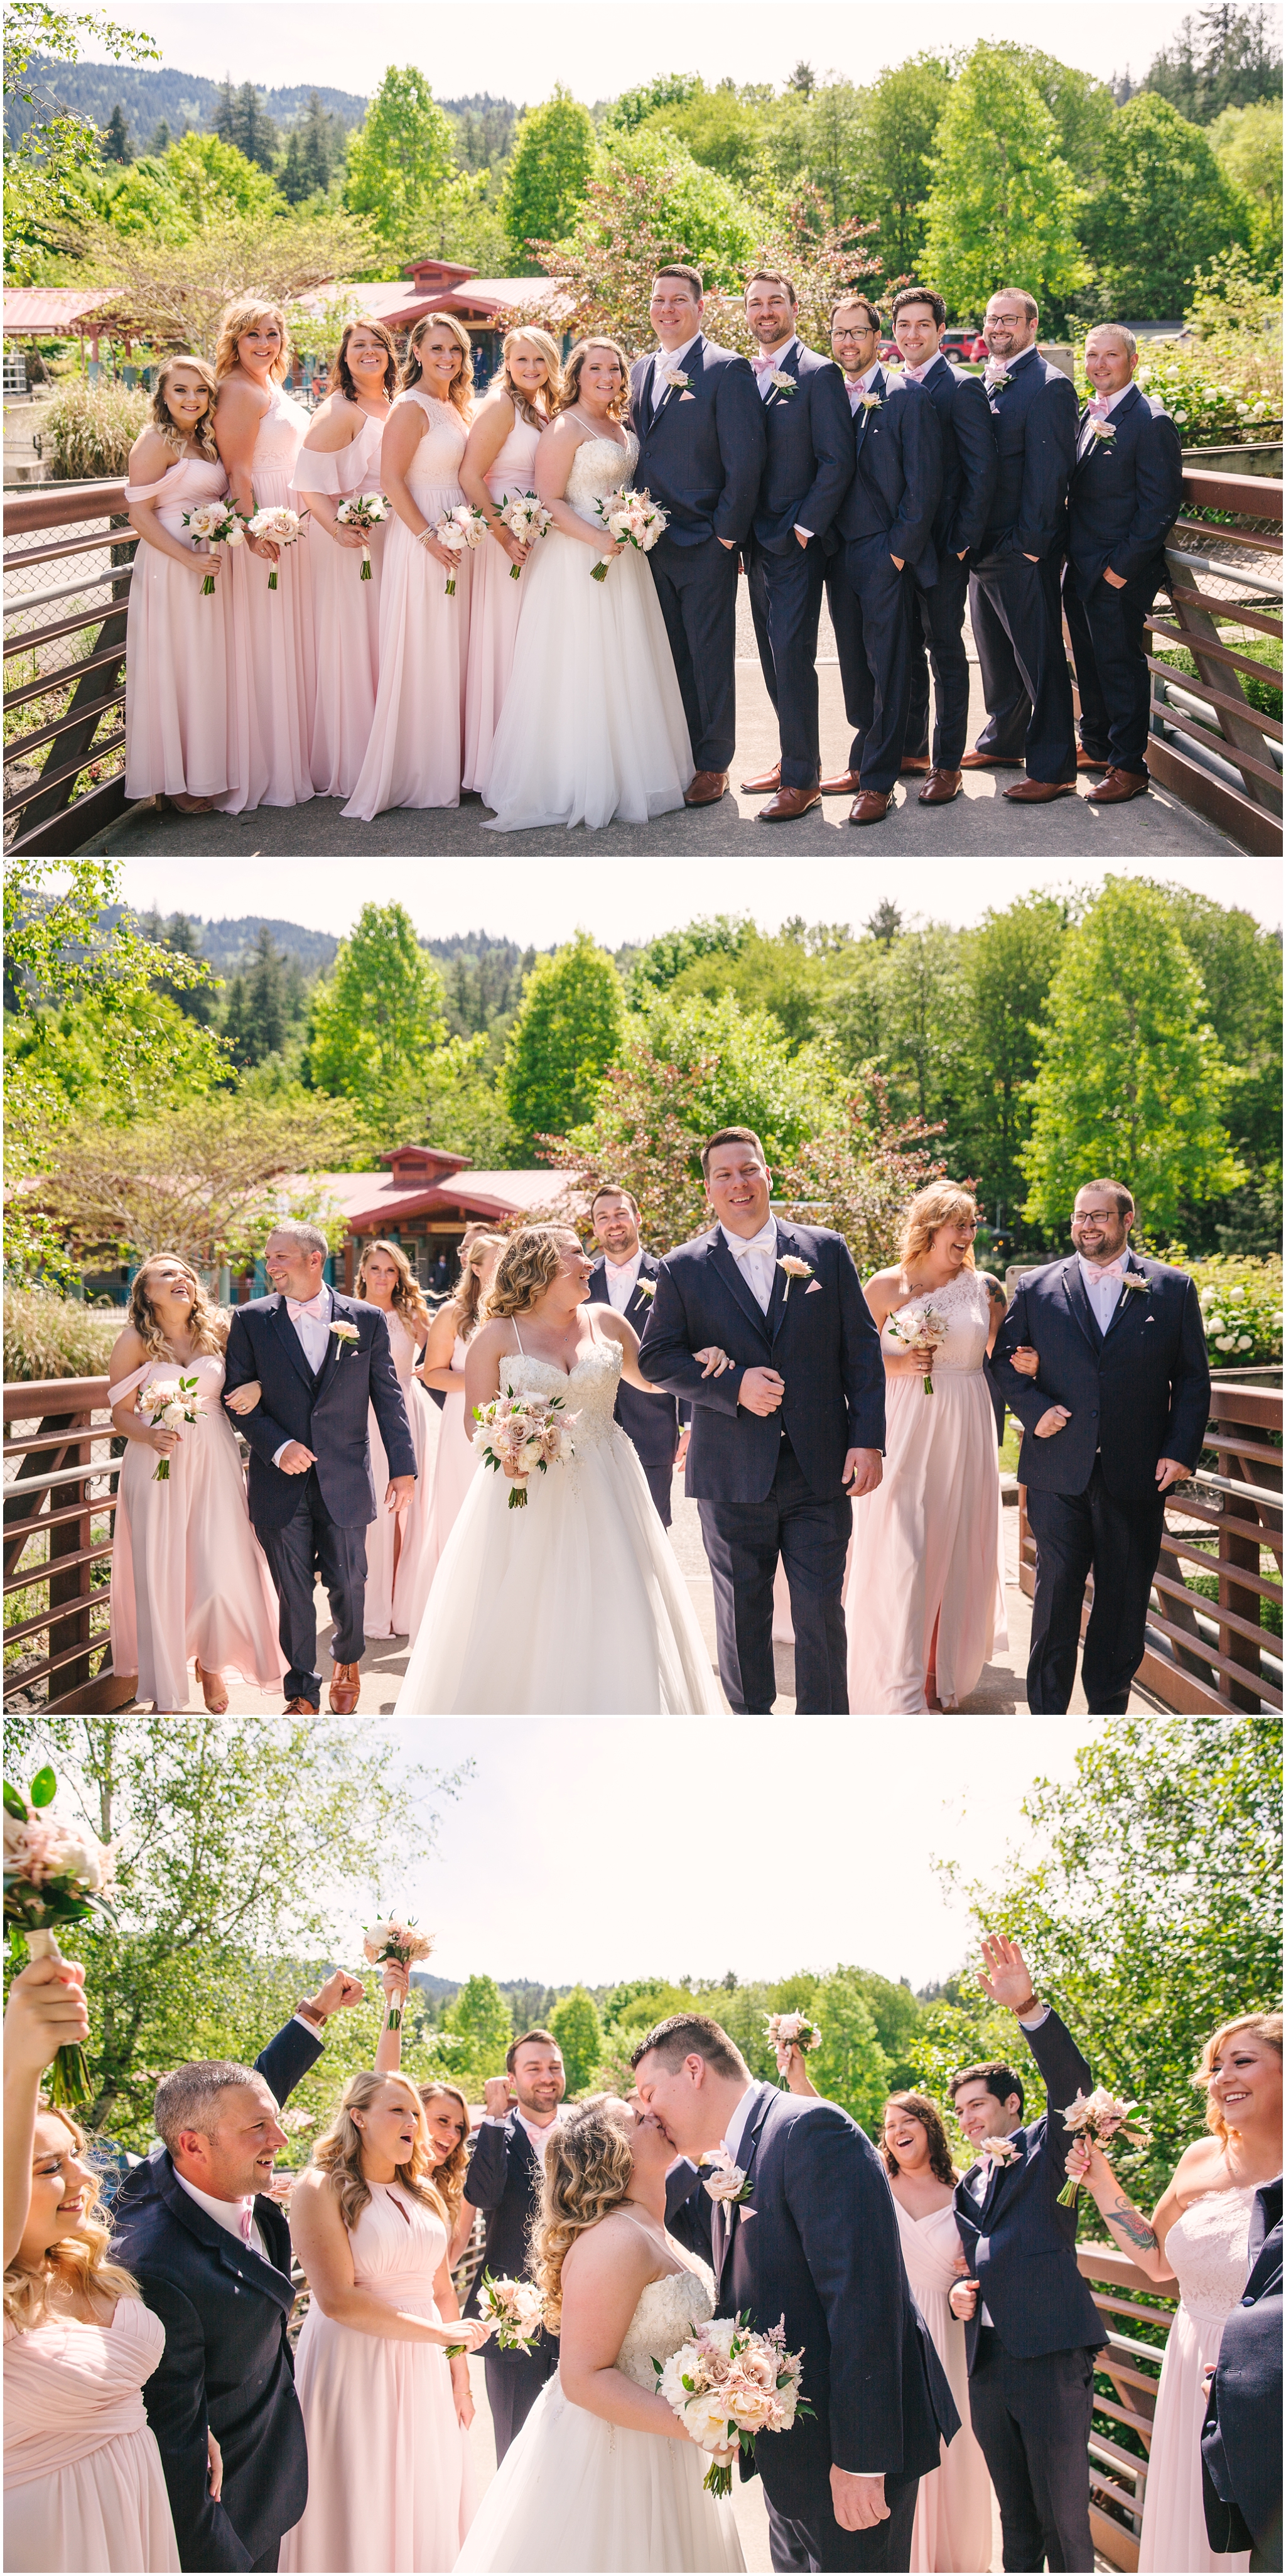 Wedding party in soft pink and navy at Issaquah Salmon Hatchery